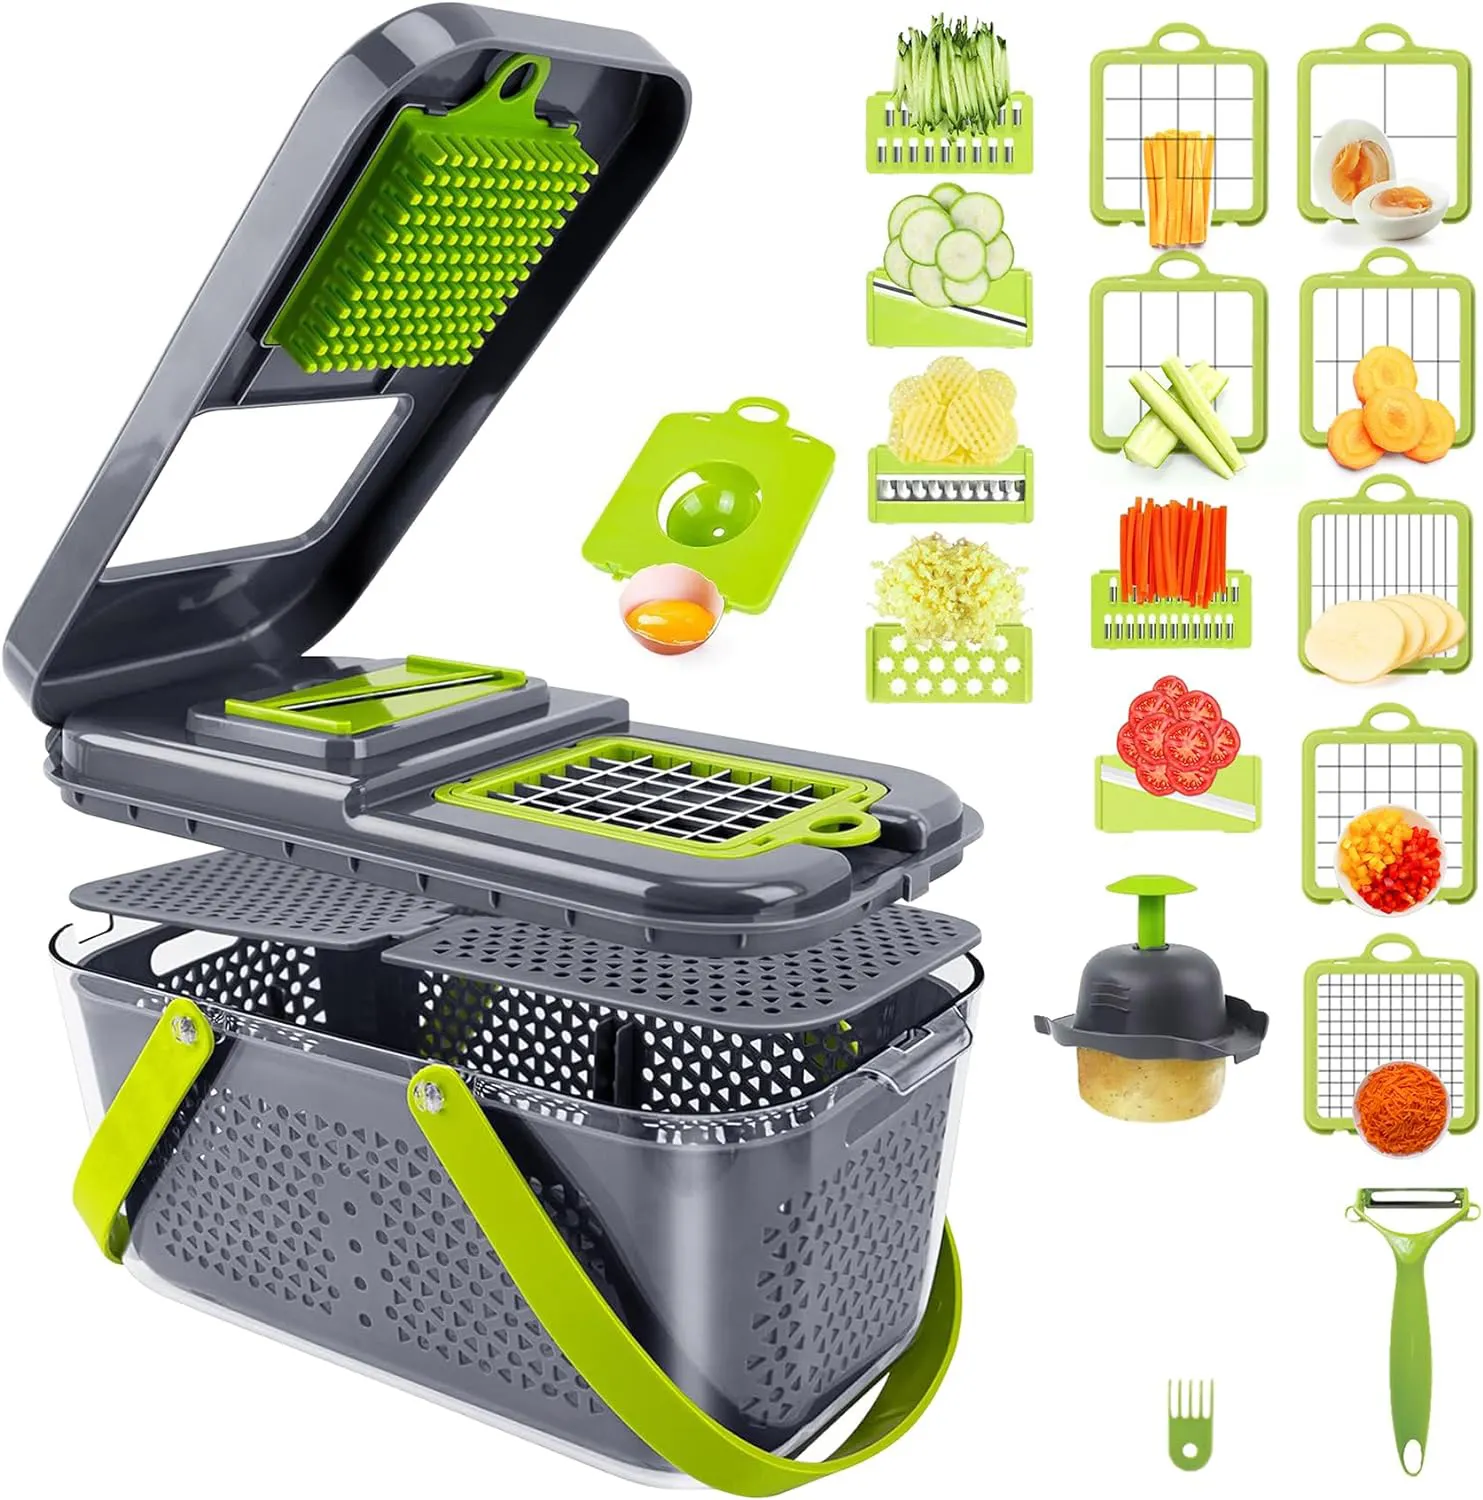 22 In 1 Kitchen Multifunction Hand Operated Vegetable Slicer,Safe Manual Salad Food Onion Vegetable Cutter Chopper